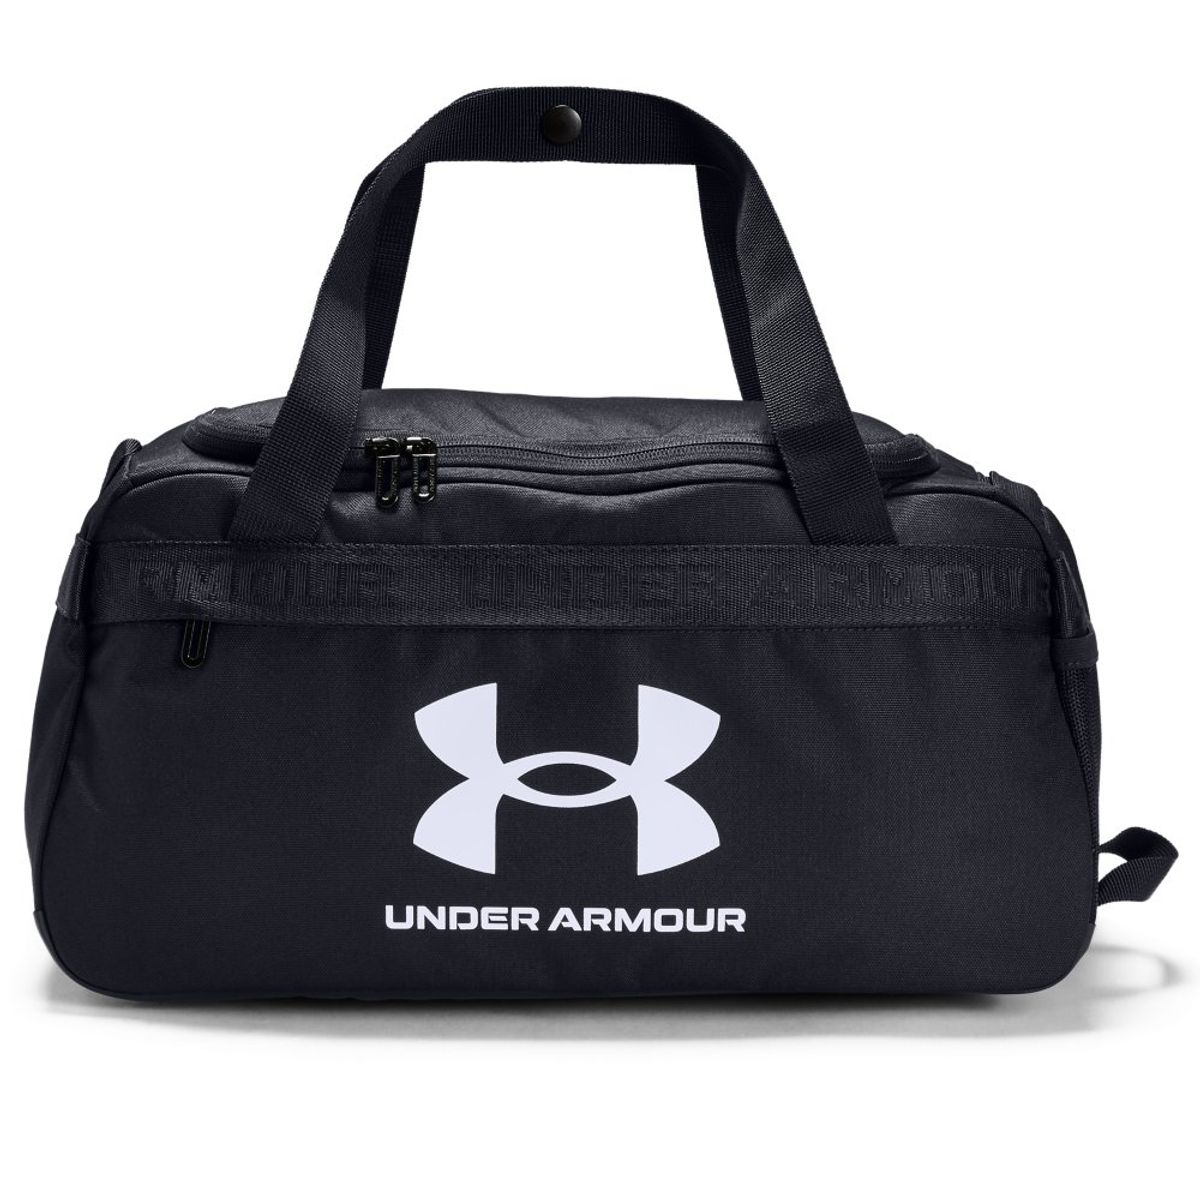 Under Armour travel bag, Men's Fashion, Bags, Backpacks on Carousell